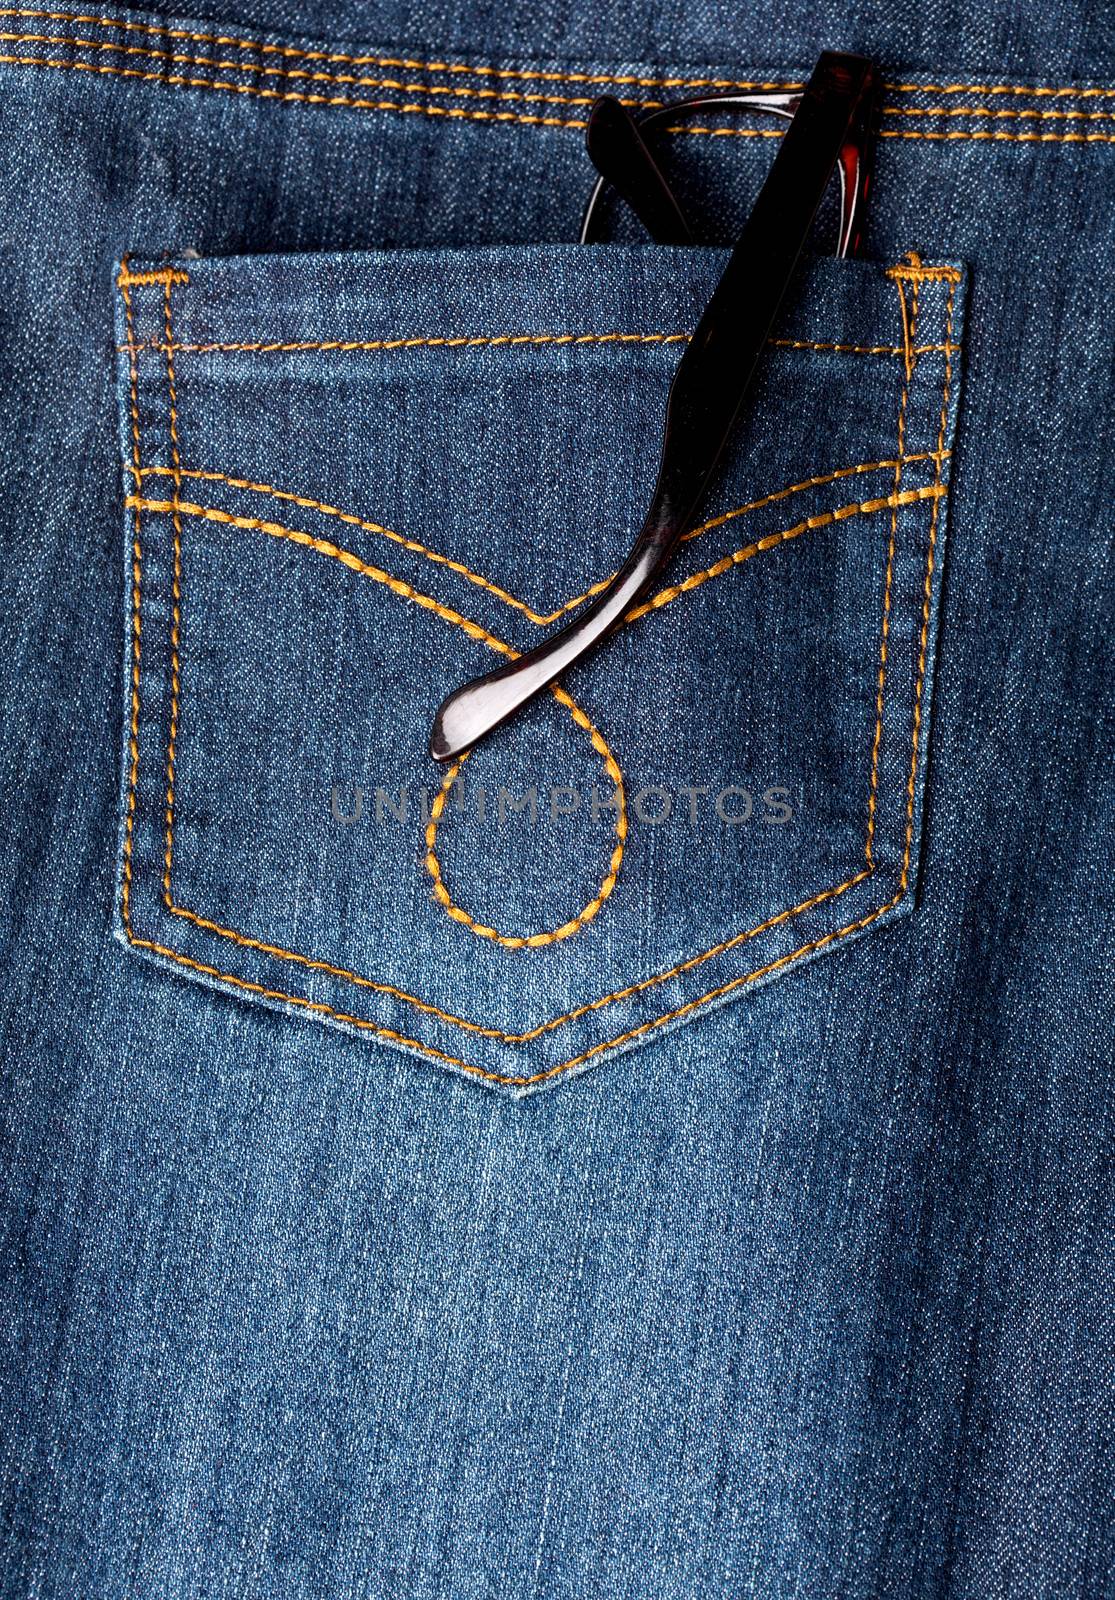 Back pocket of a jeans with spectacles in it